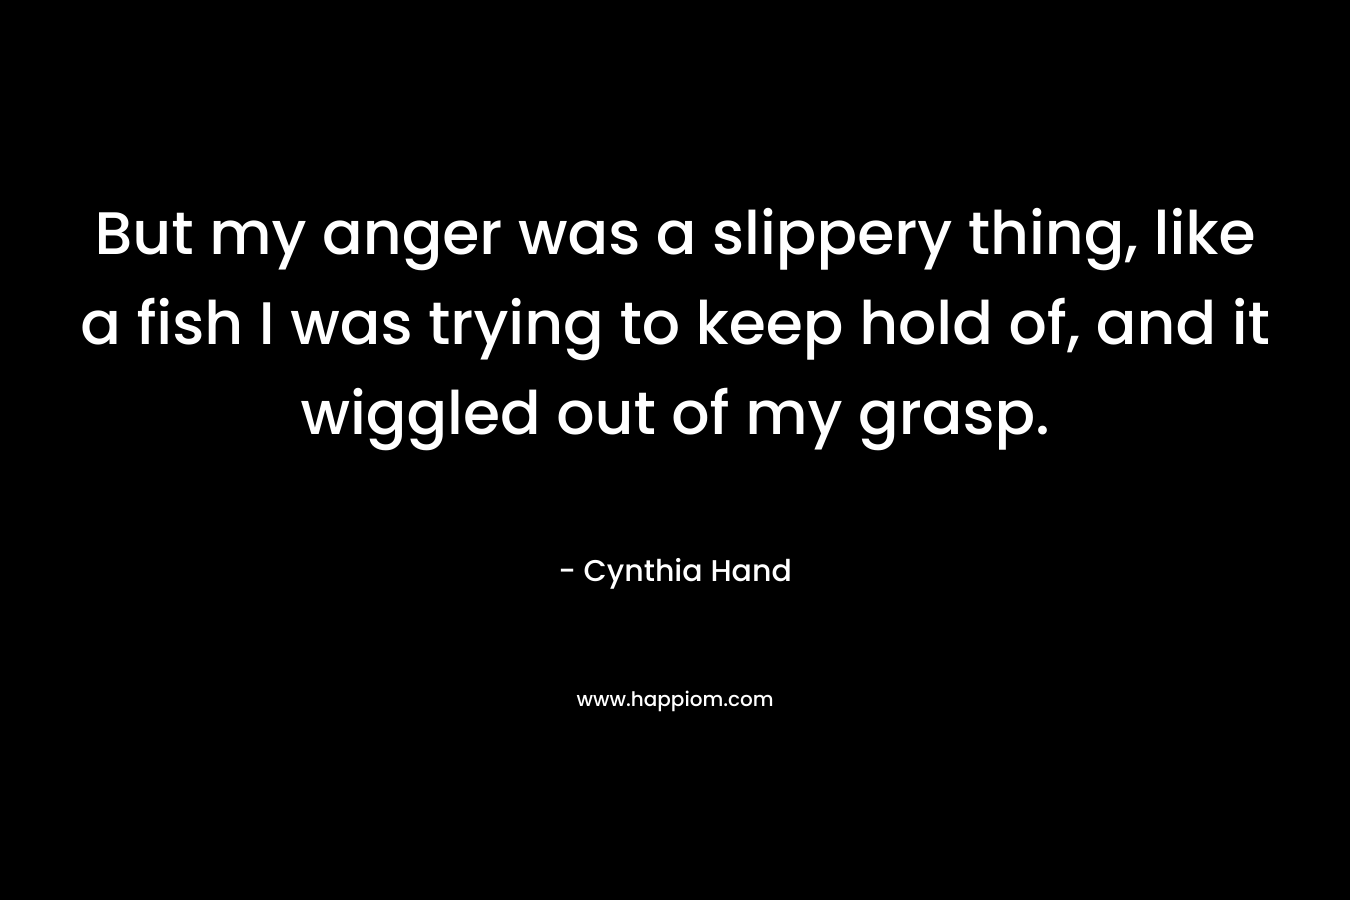 But my anger was a slippery thing, like a fish I was trying to keep hold of, and it wiggled out of my grasp.